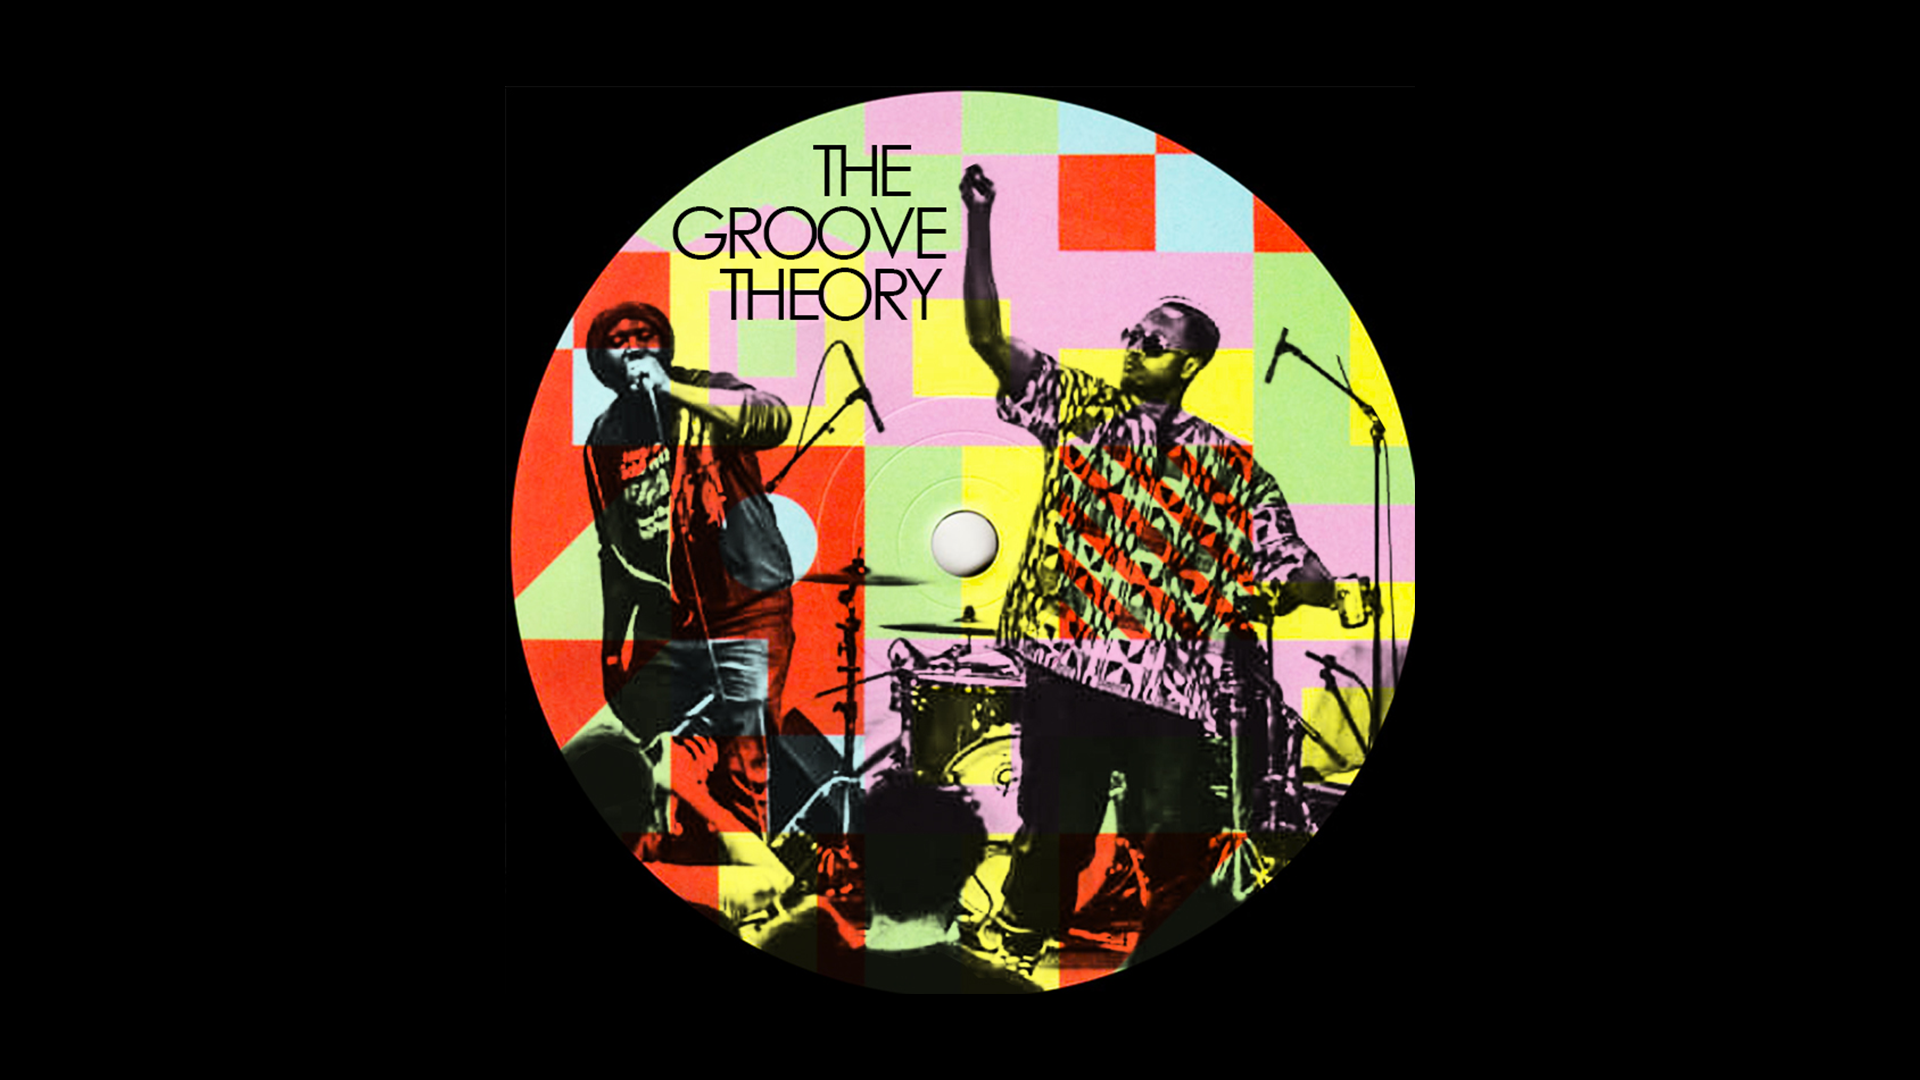 THE GROOVE THEORY ***SATURDAY NIGHT SPECIAL!*** Hosted By The Stakes